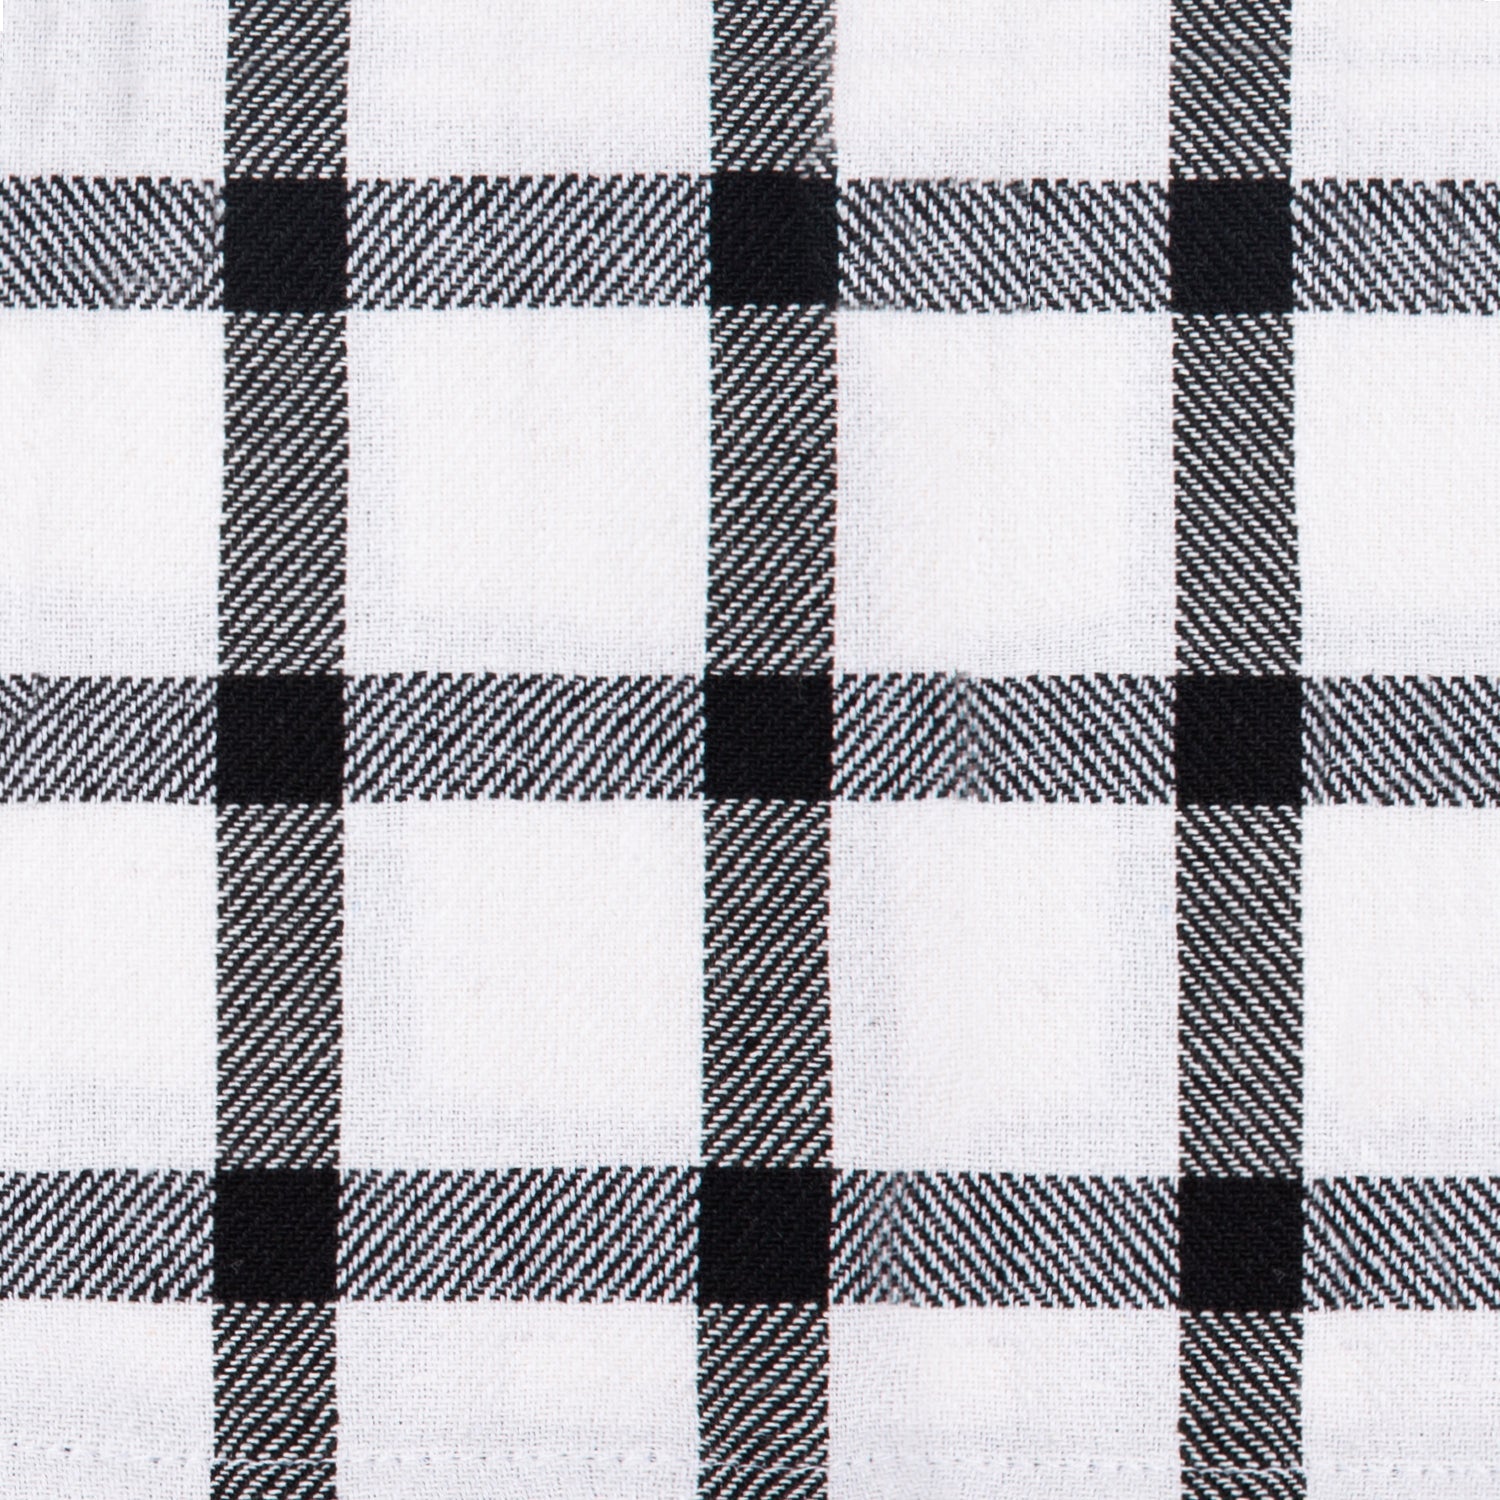 Detailed view of a black and white gingham dish towel